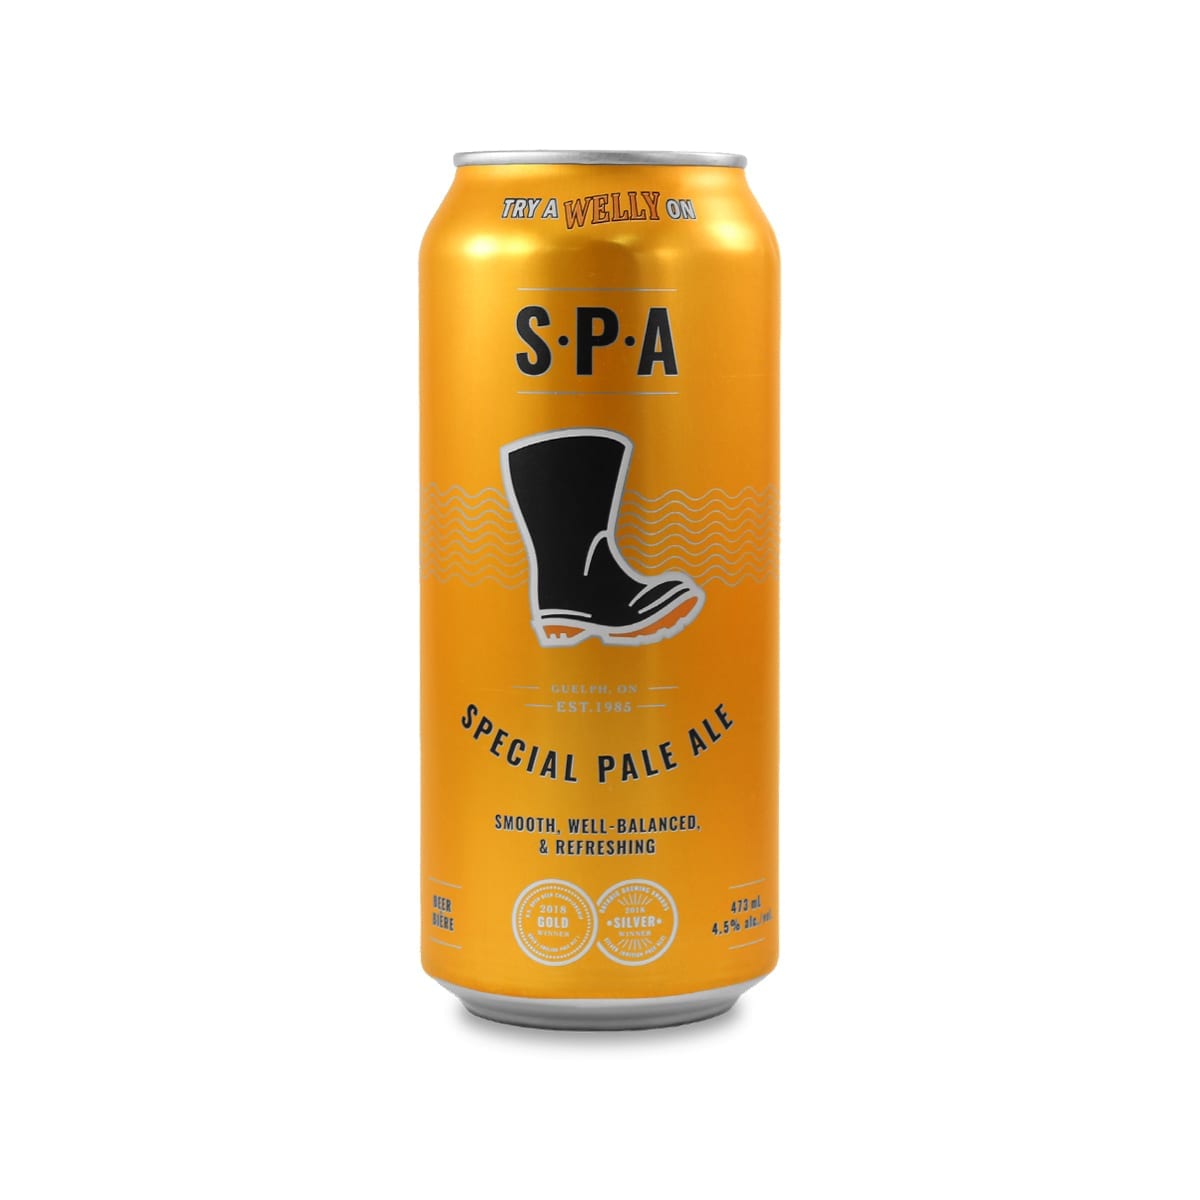 Special Pale Ale Brand Update